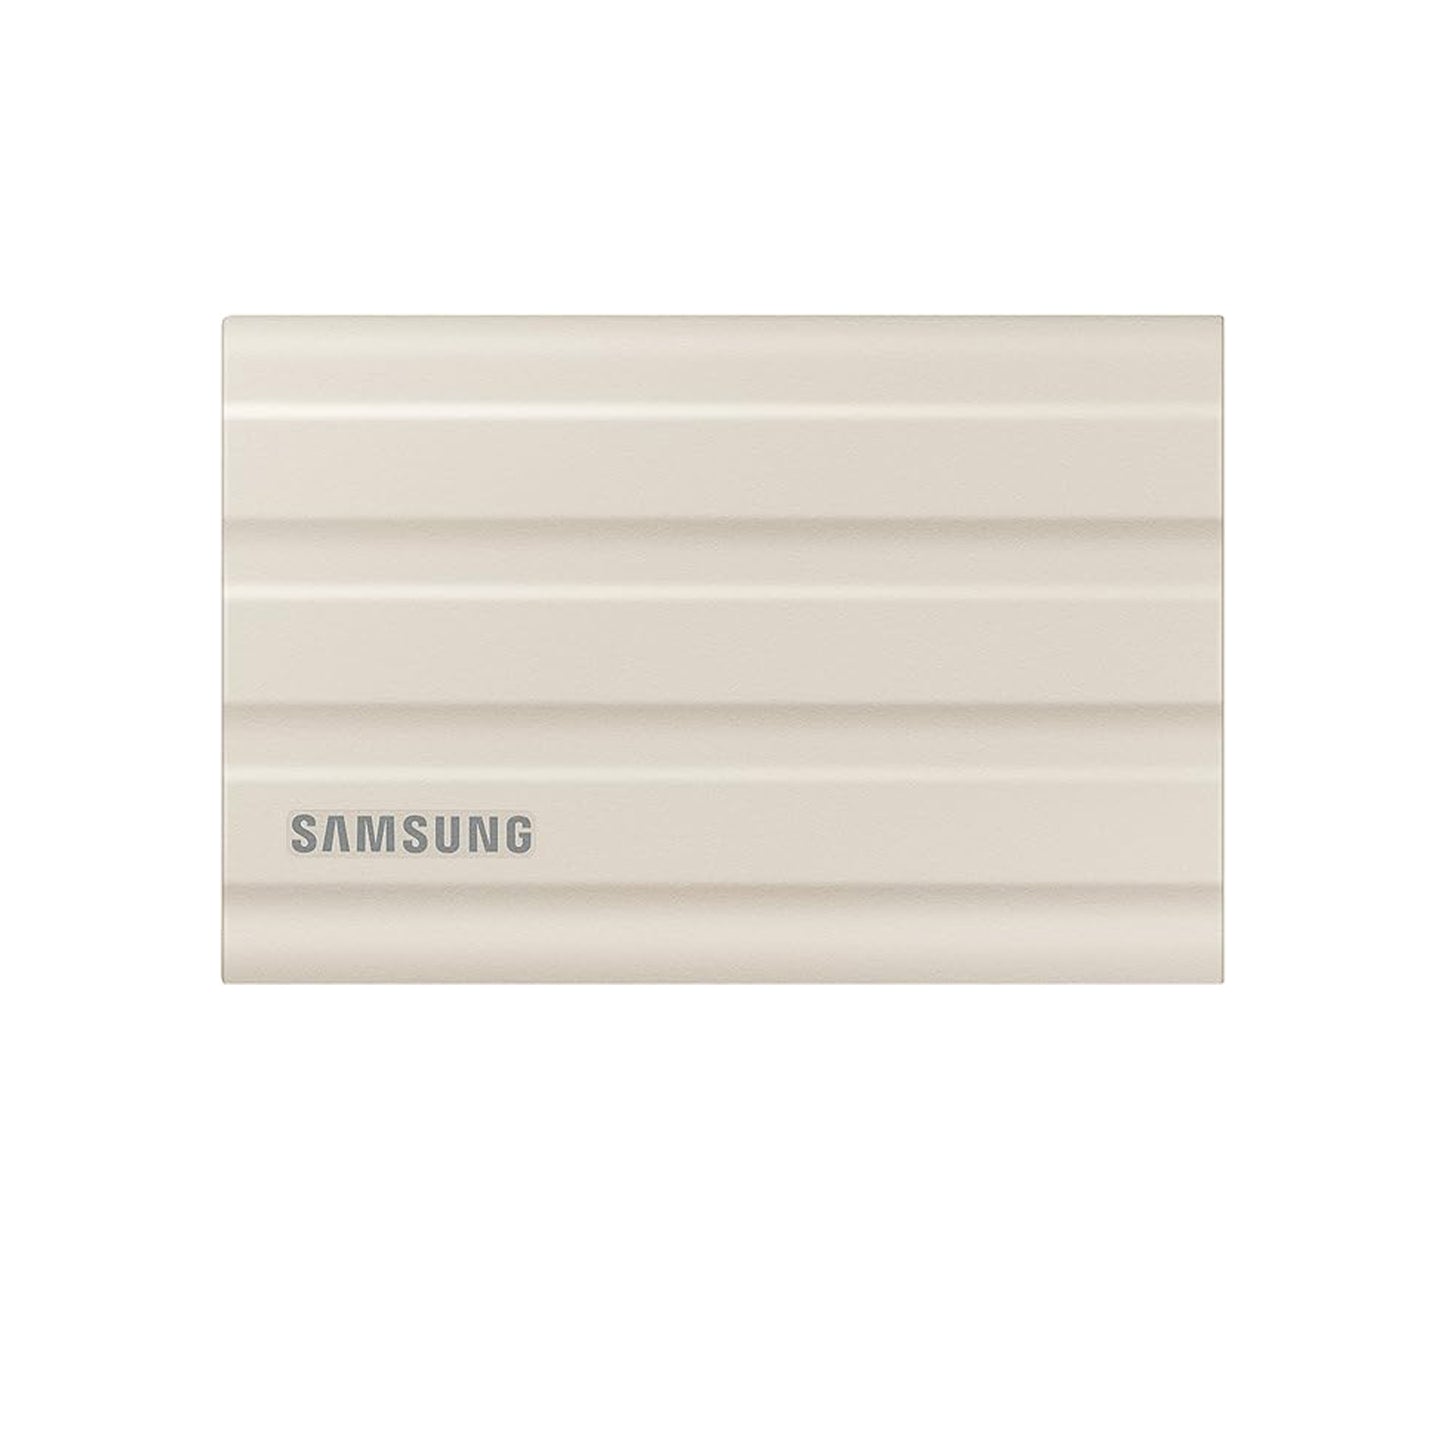 SAMSUNG T7 Shield 2TB, Portable SSD, up to 1050MB/s, USB 3.2 Gen2, Rugged, IP65 Rated, for Photographers, Content Creators and Gaming, External Solid State Drive ‎(MU-PE2T0K/AM, 2022), Beige